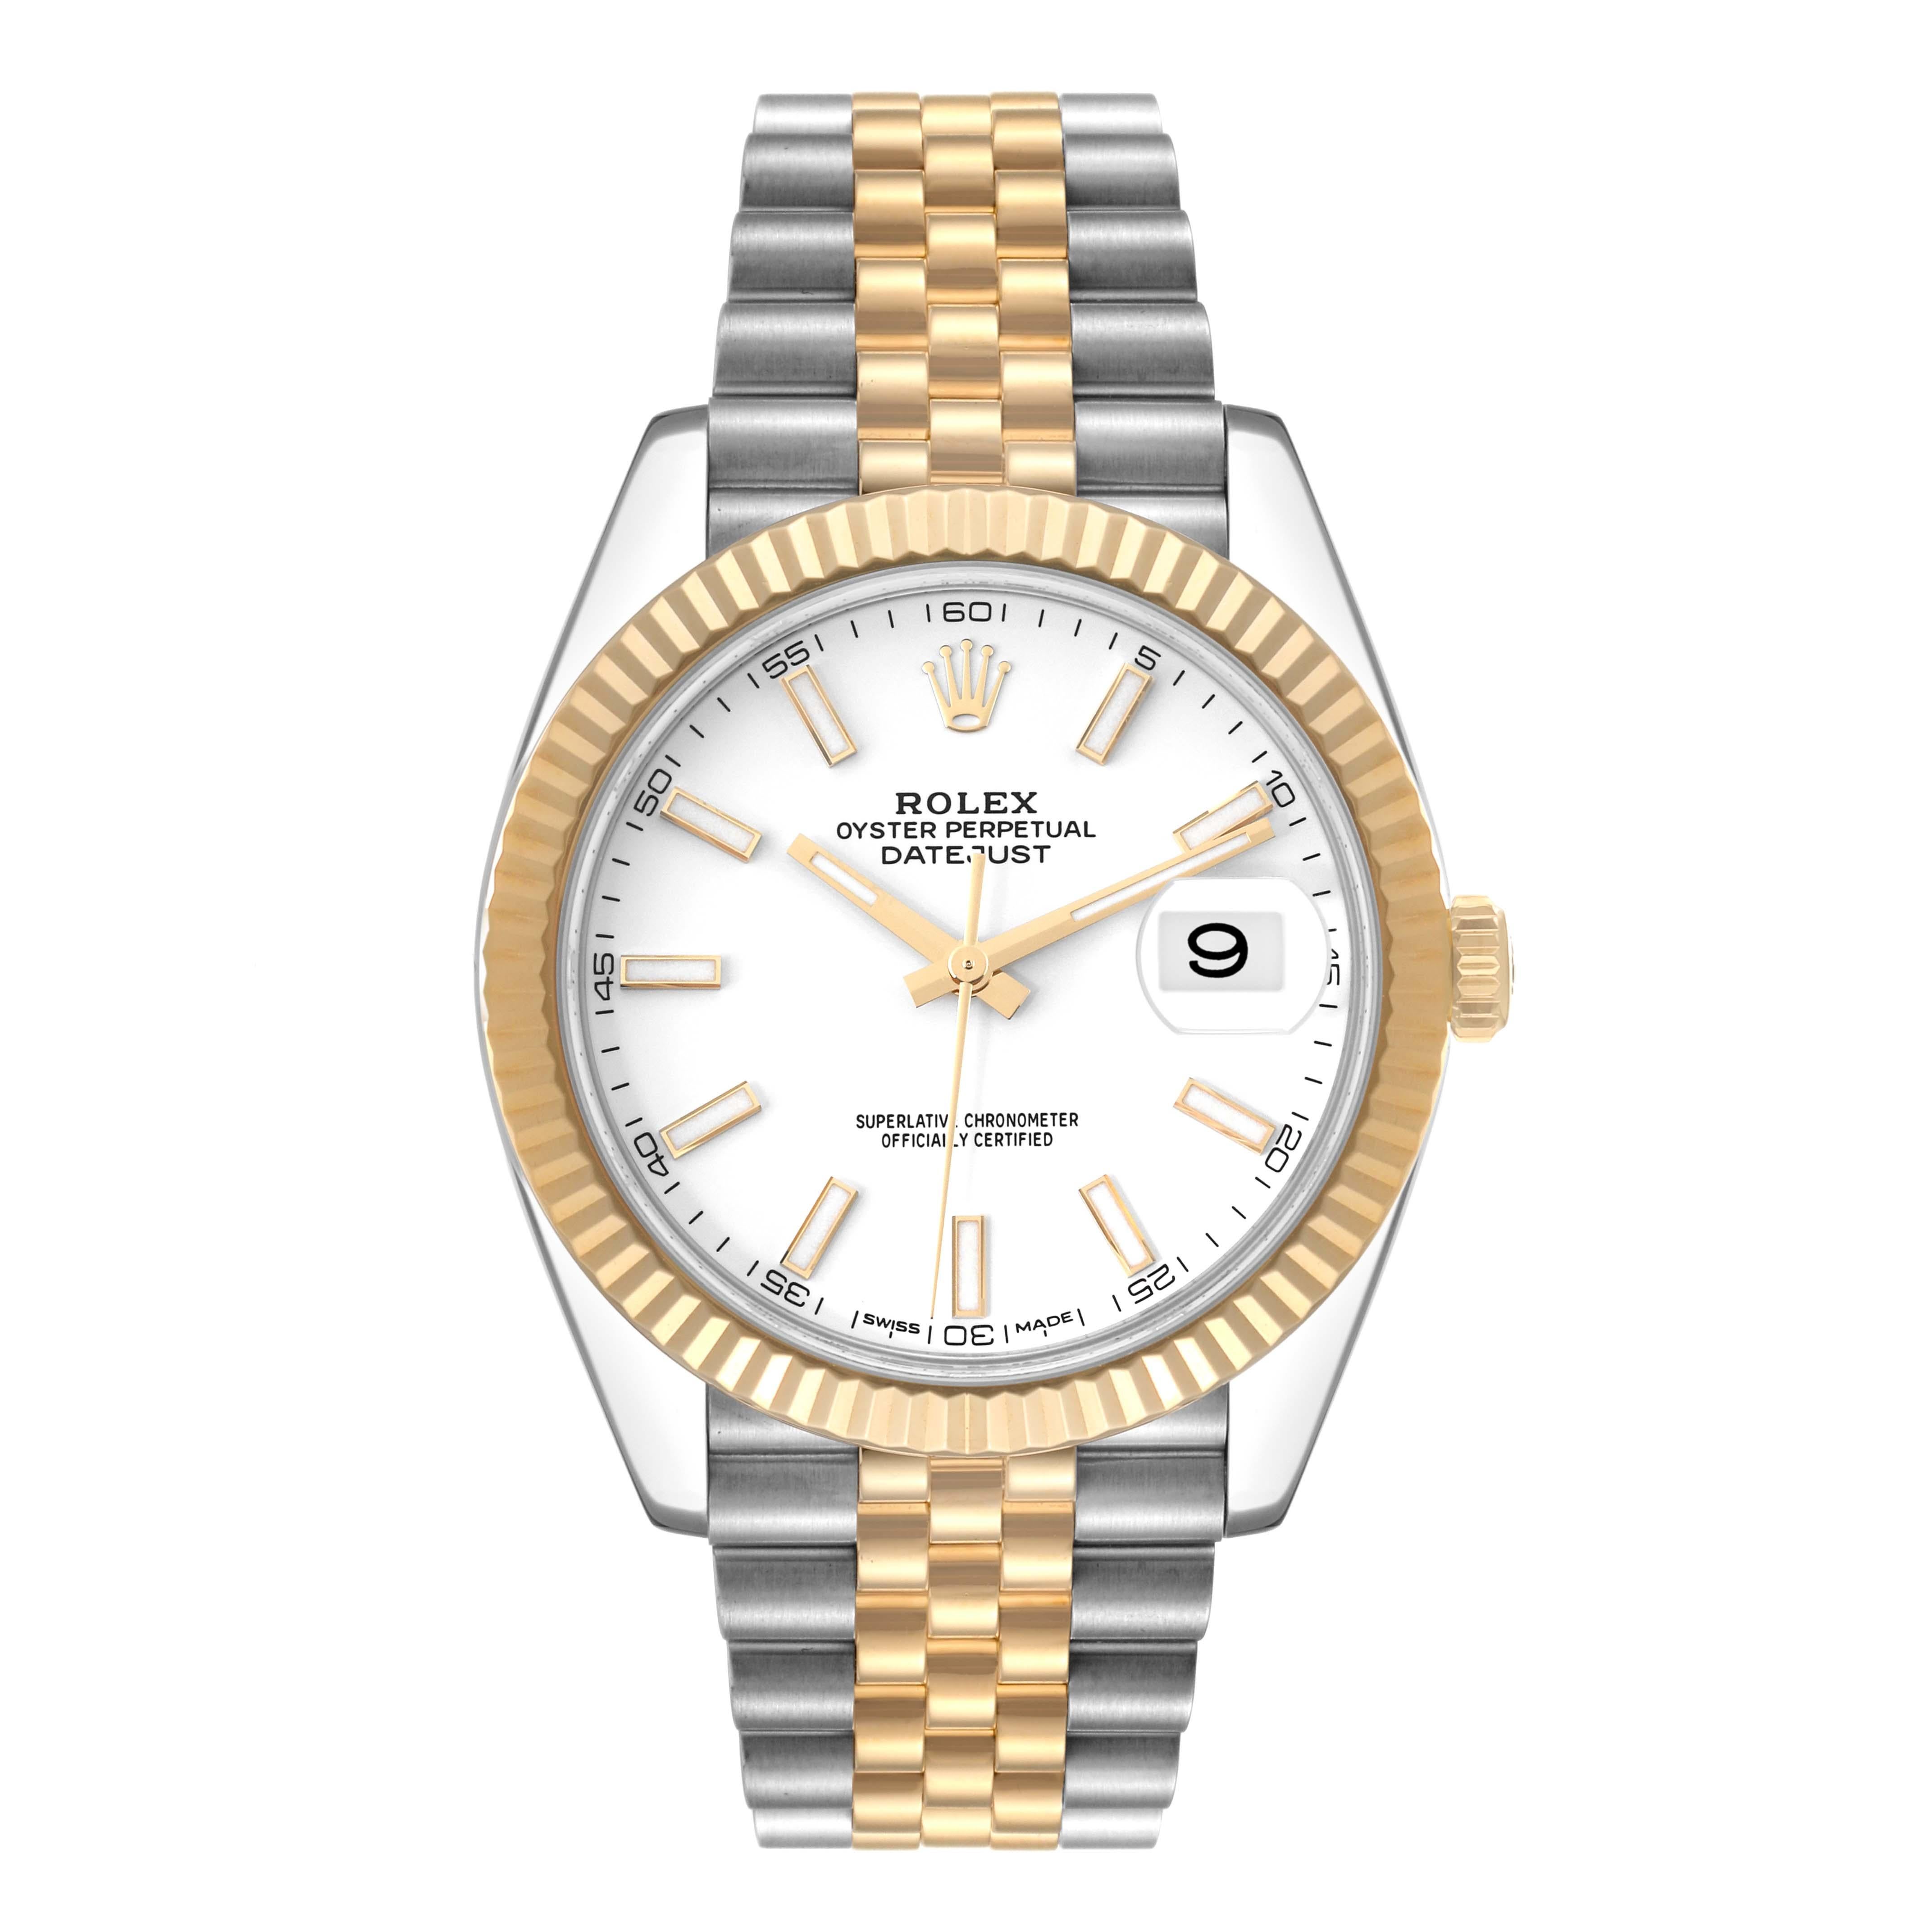 Rolex Datejust 41 Steel Yellow Gold White Dial Mens Watch 126333. Officially certified chronometer self-winding movement. Stainless steel and 18K yellow gold case 41.0 mm in diameter.  High polished lugs. Rolex logo on a crown. 18K yellow gold